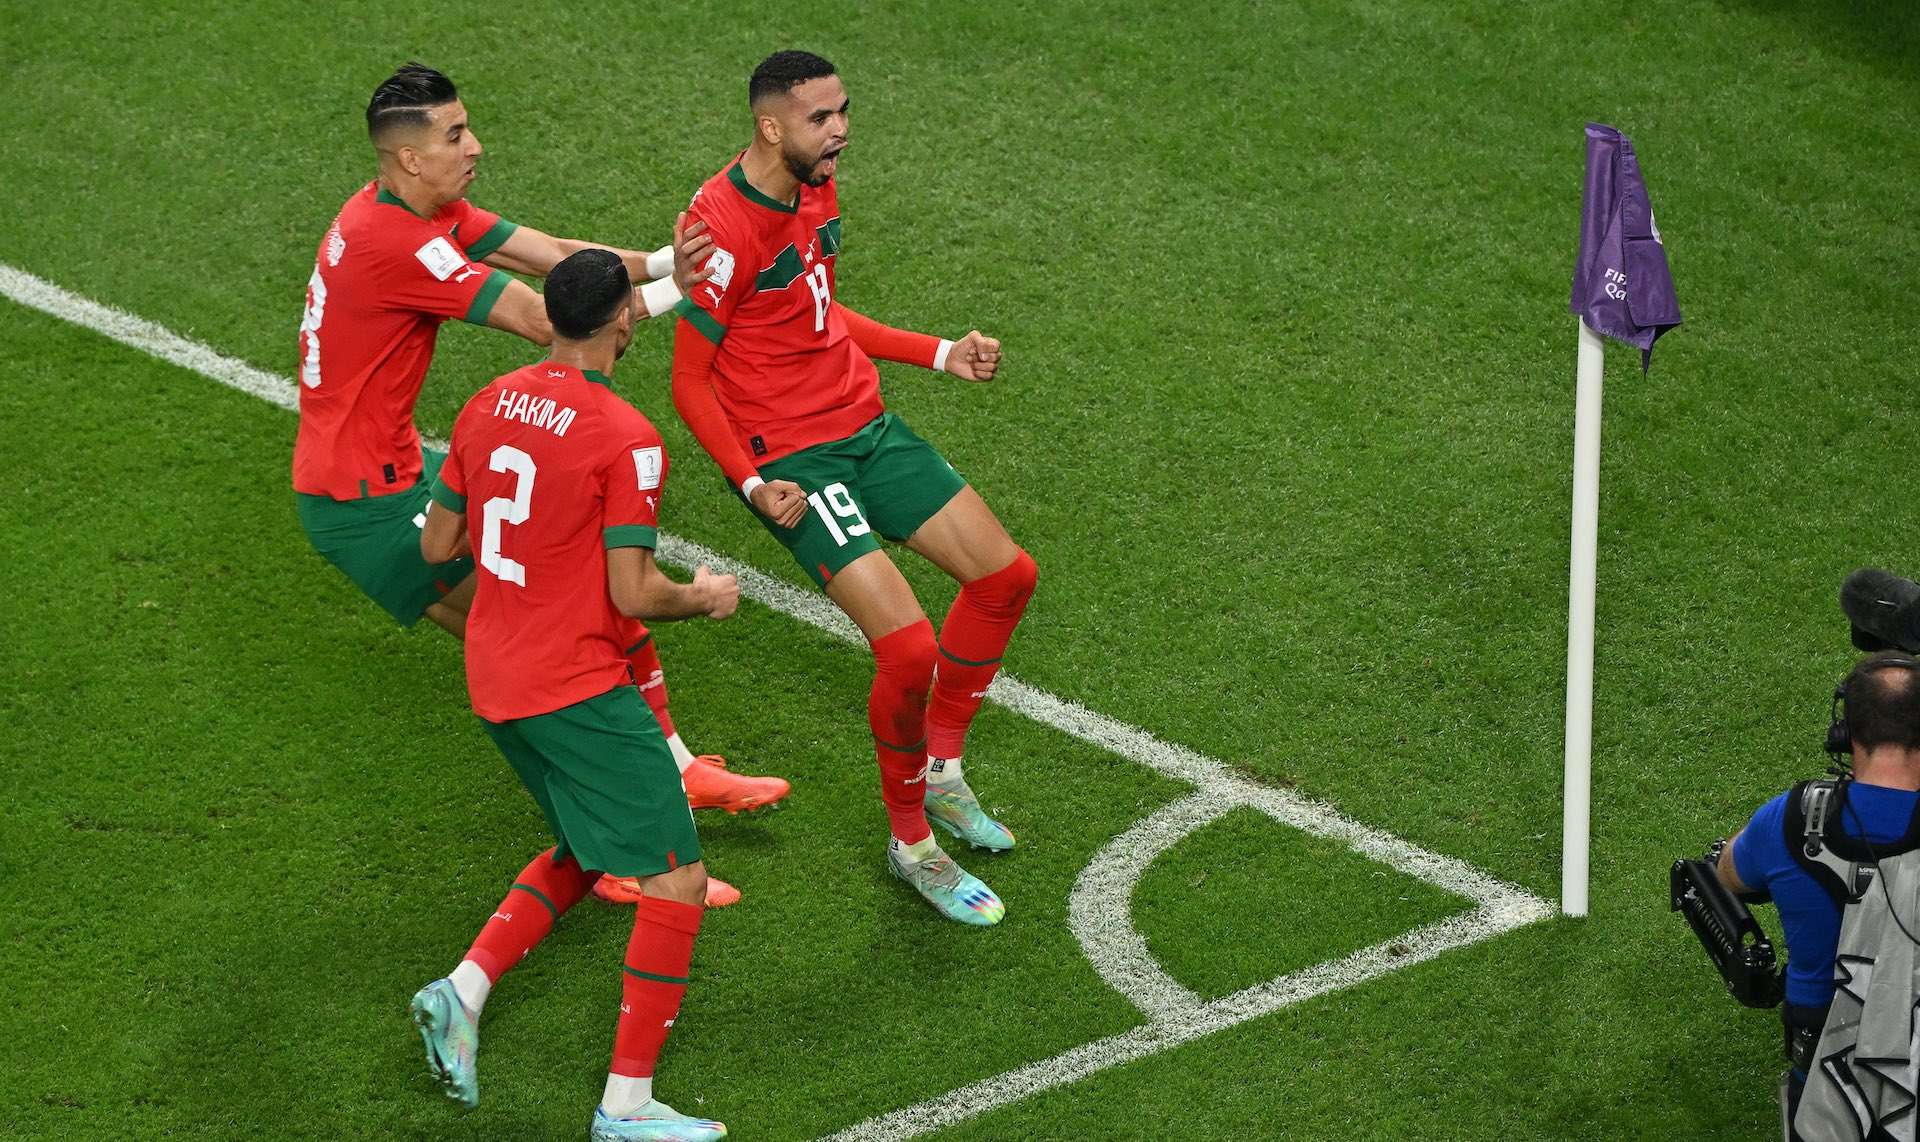 Morocco advances to the semi-final after beating Portugal 1-0